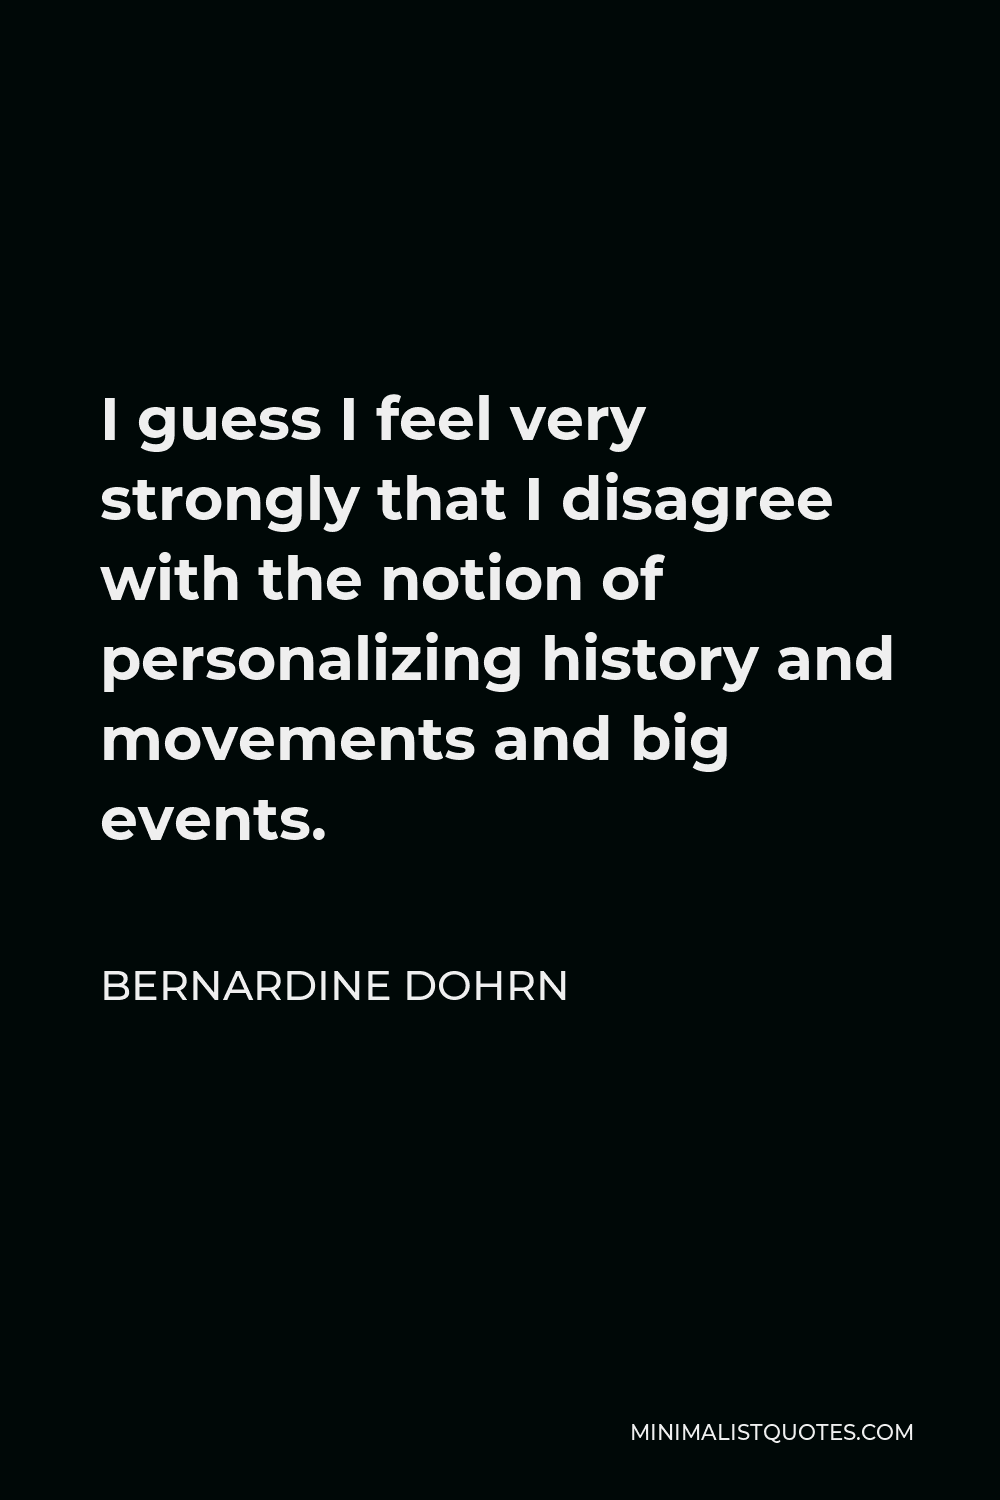 Bernardine Dohrn Quote - I guess I feel very strongly that I disagree with the notion of personalizing history and movements and big events.